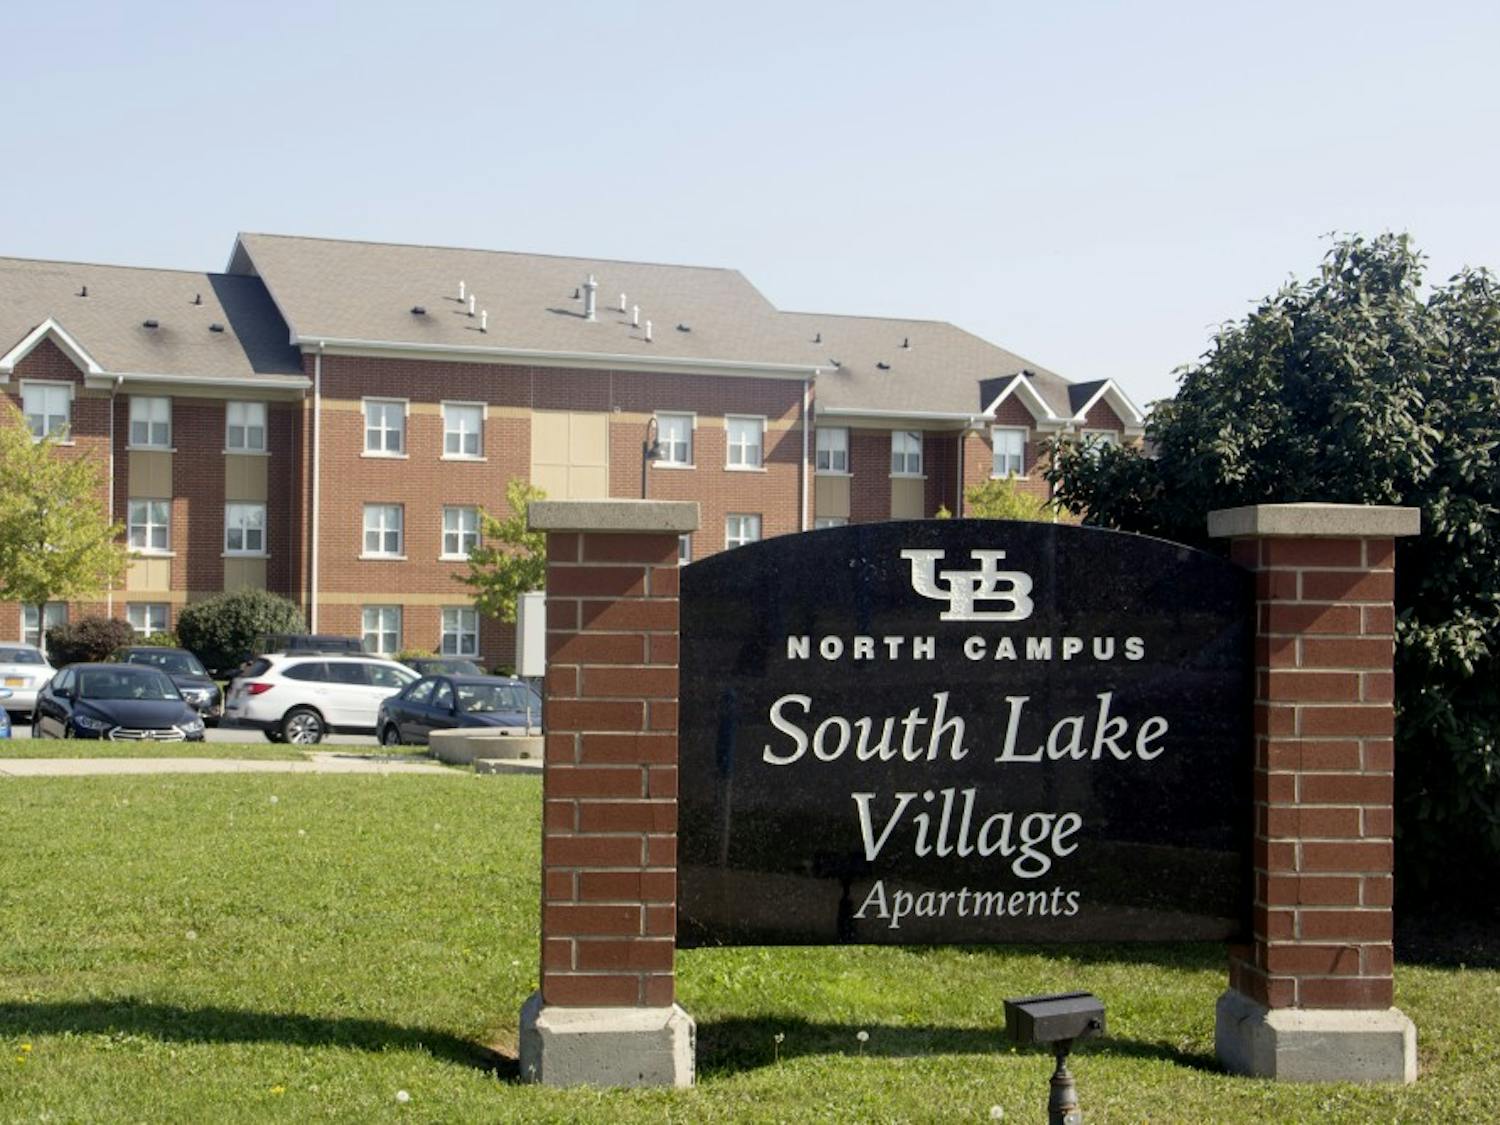 Many South Lake Village residents have consistently seen spiders in their apartments. The residents put work orders in to address the problem, but have been told conflicting information from maintenance and Campus Living regarding a permanent fix.